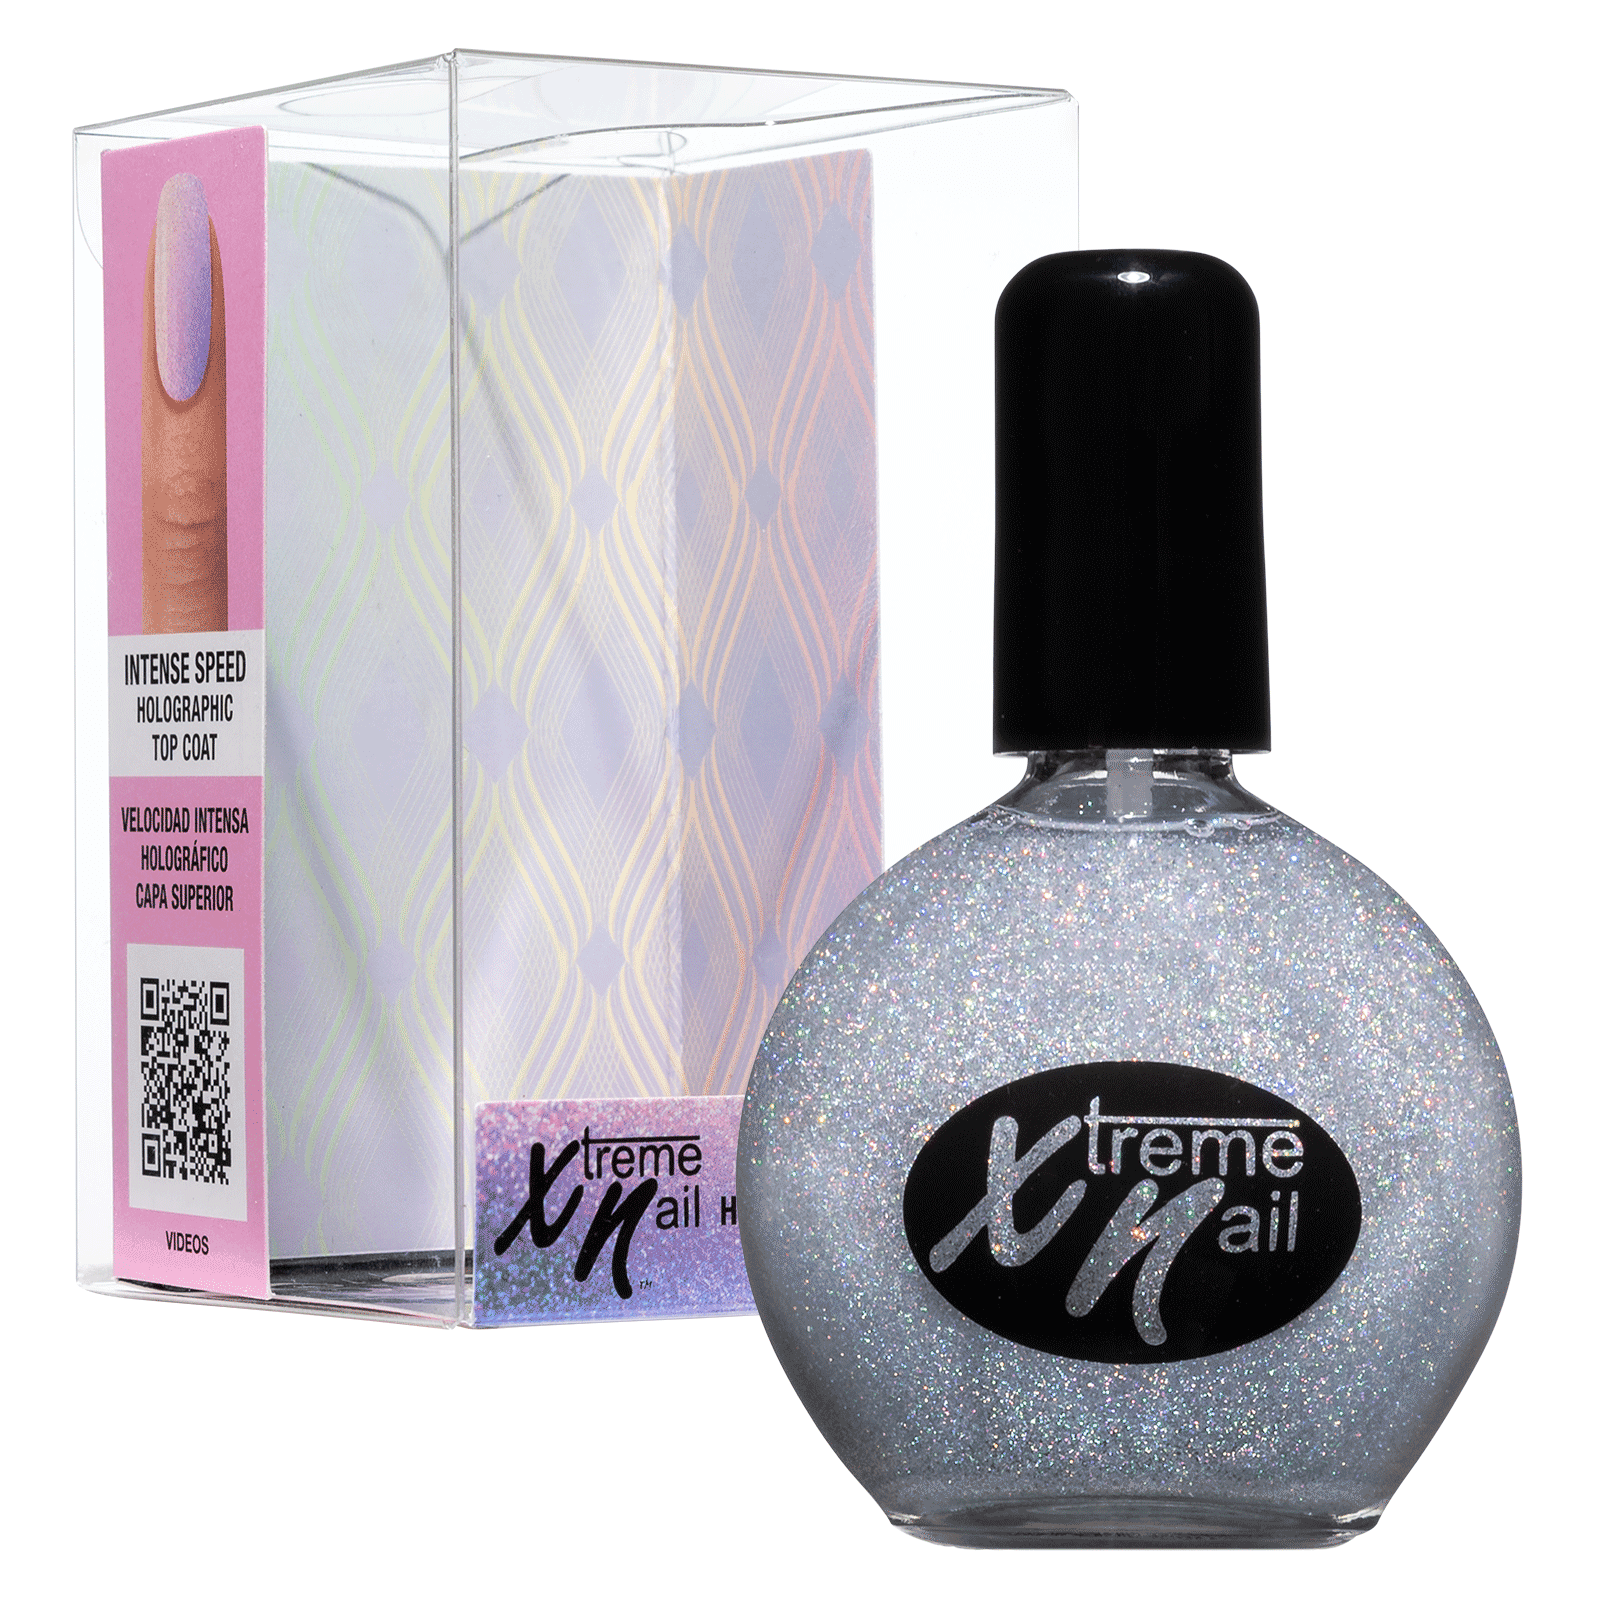 Xtreme Nail Intense Speed Holographic Top Coat 2.5oz